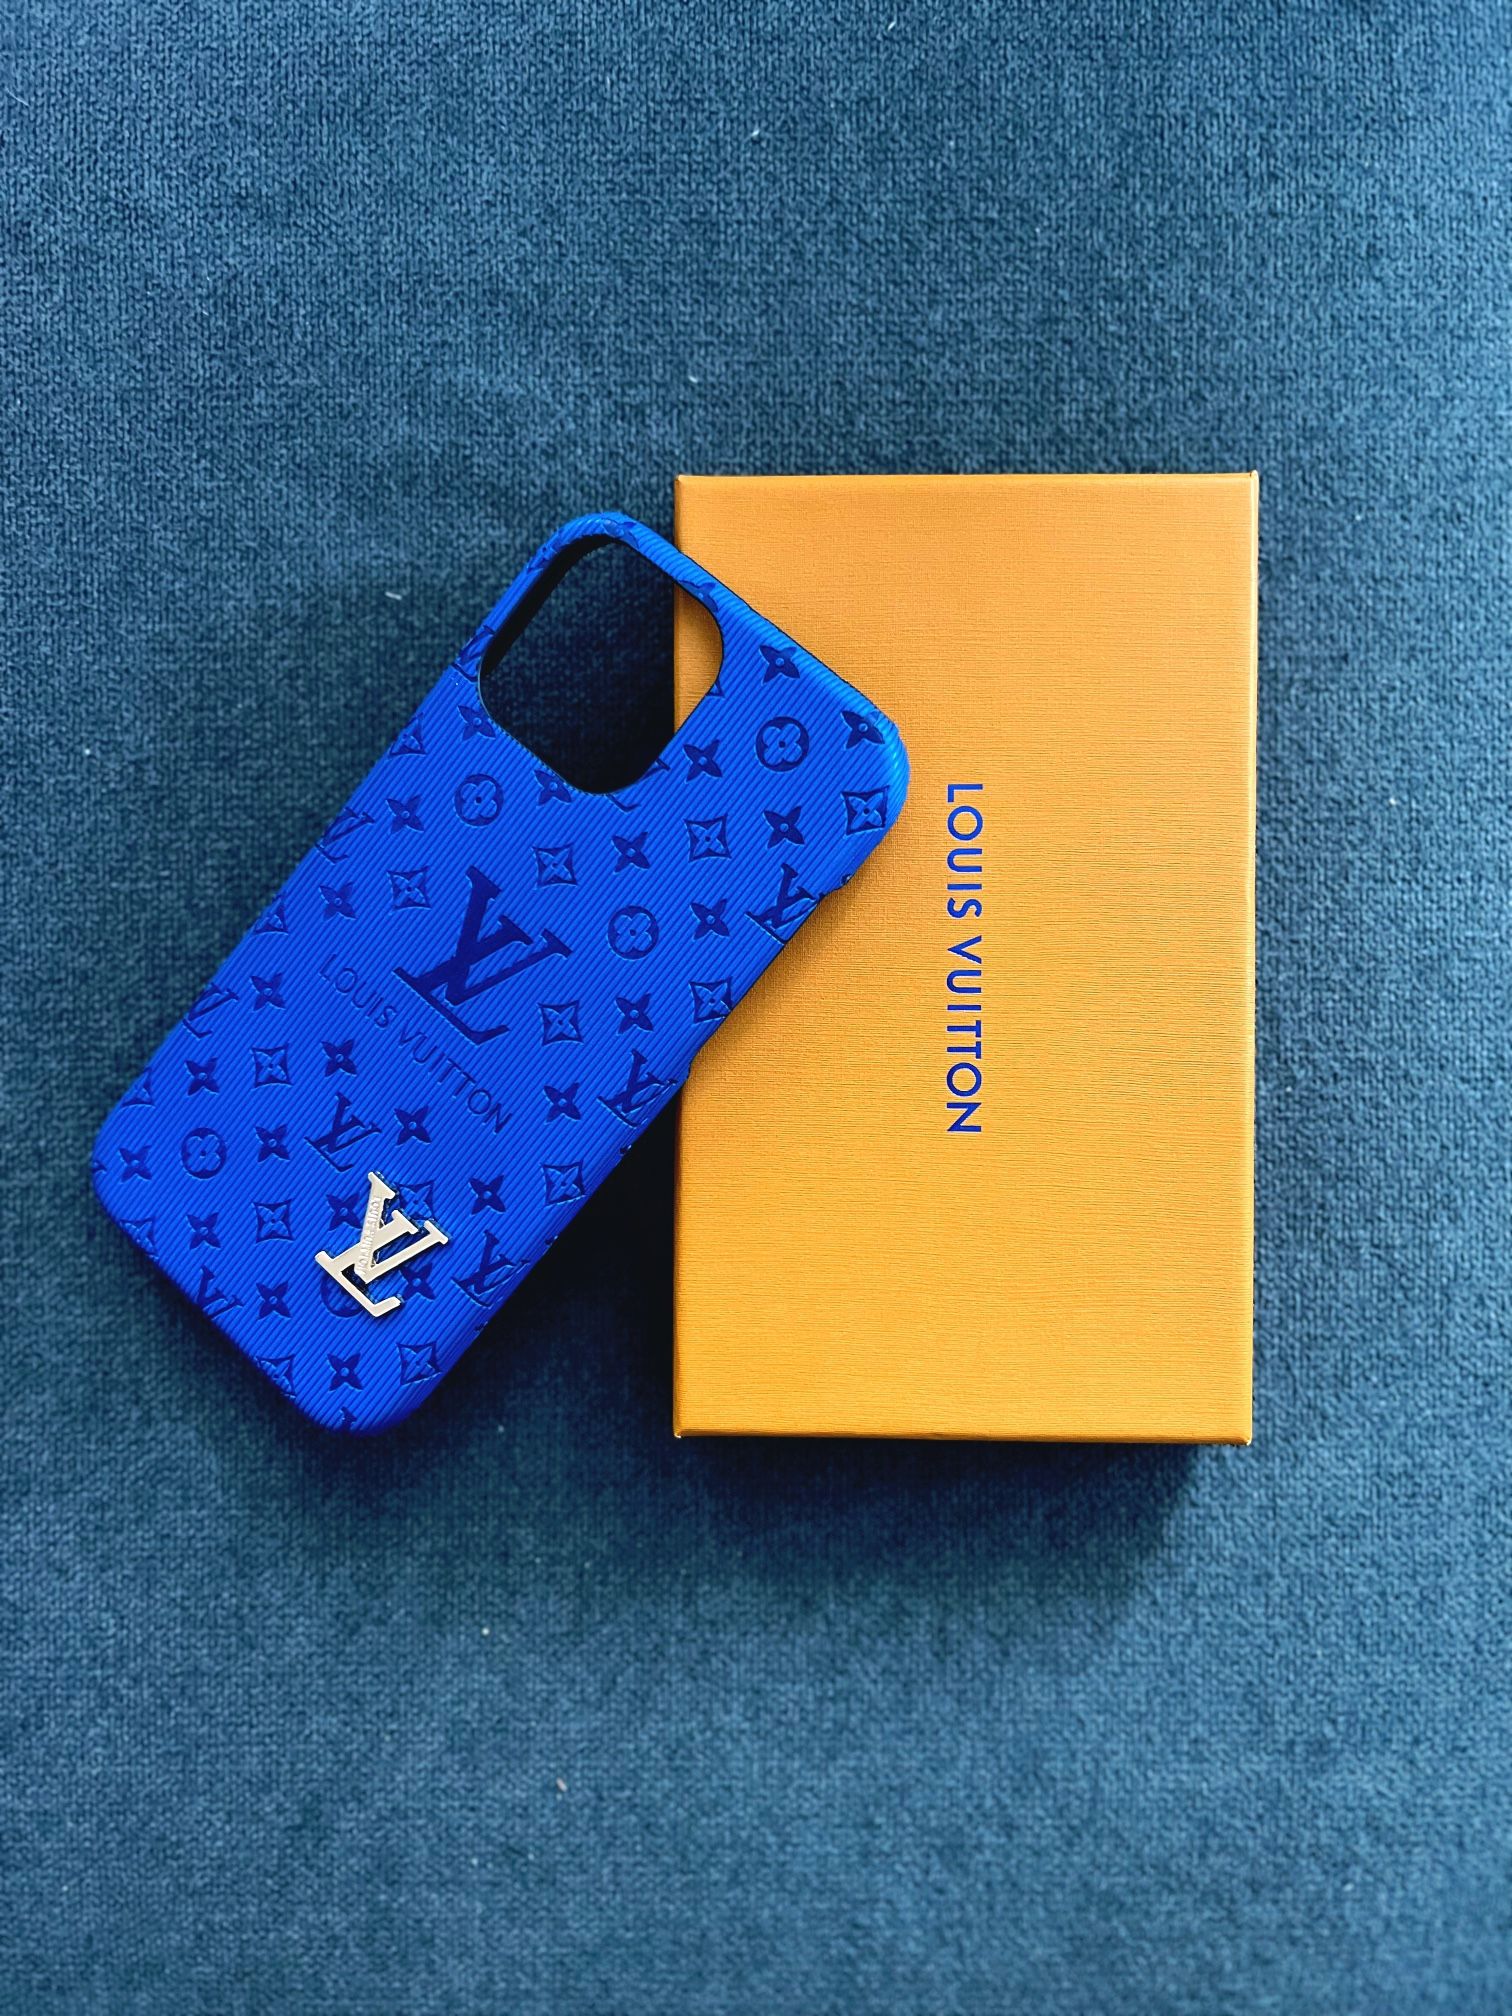 Louis Vuitton iphone 8 phone case for Sale in Oxnard, CA - OfferUp